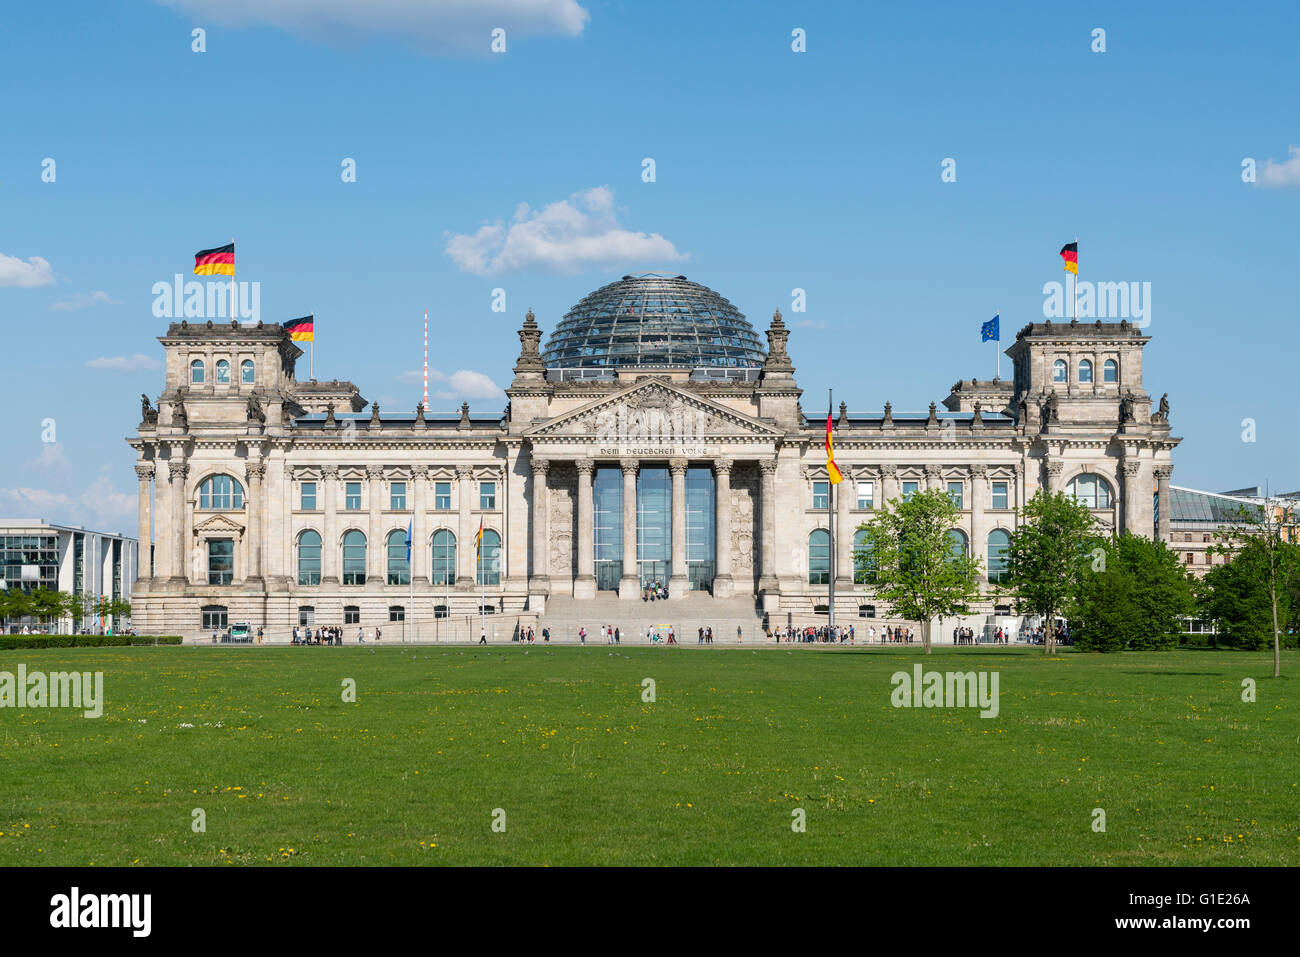 View of the Reichstag Parliament building in Berlin Germany Stock Photo